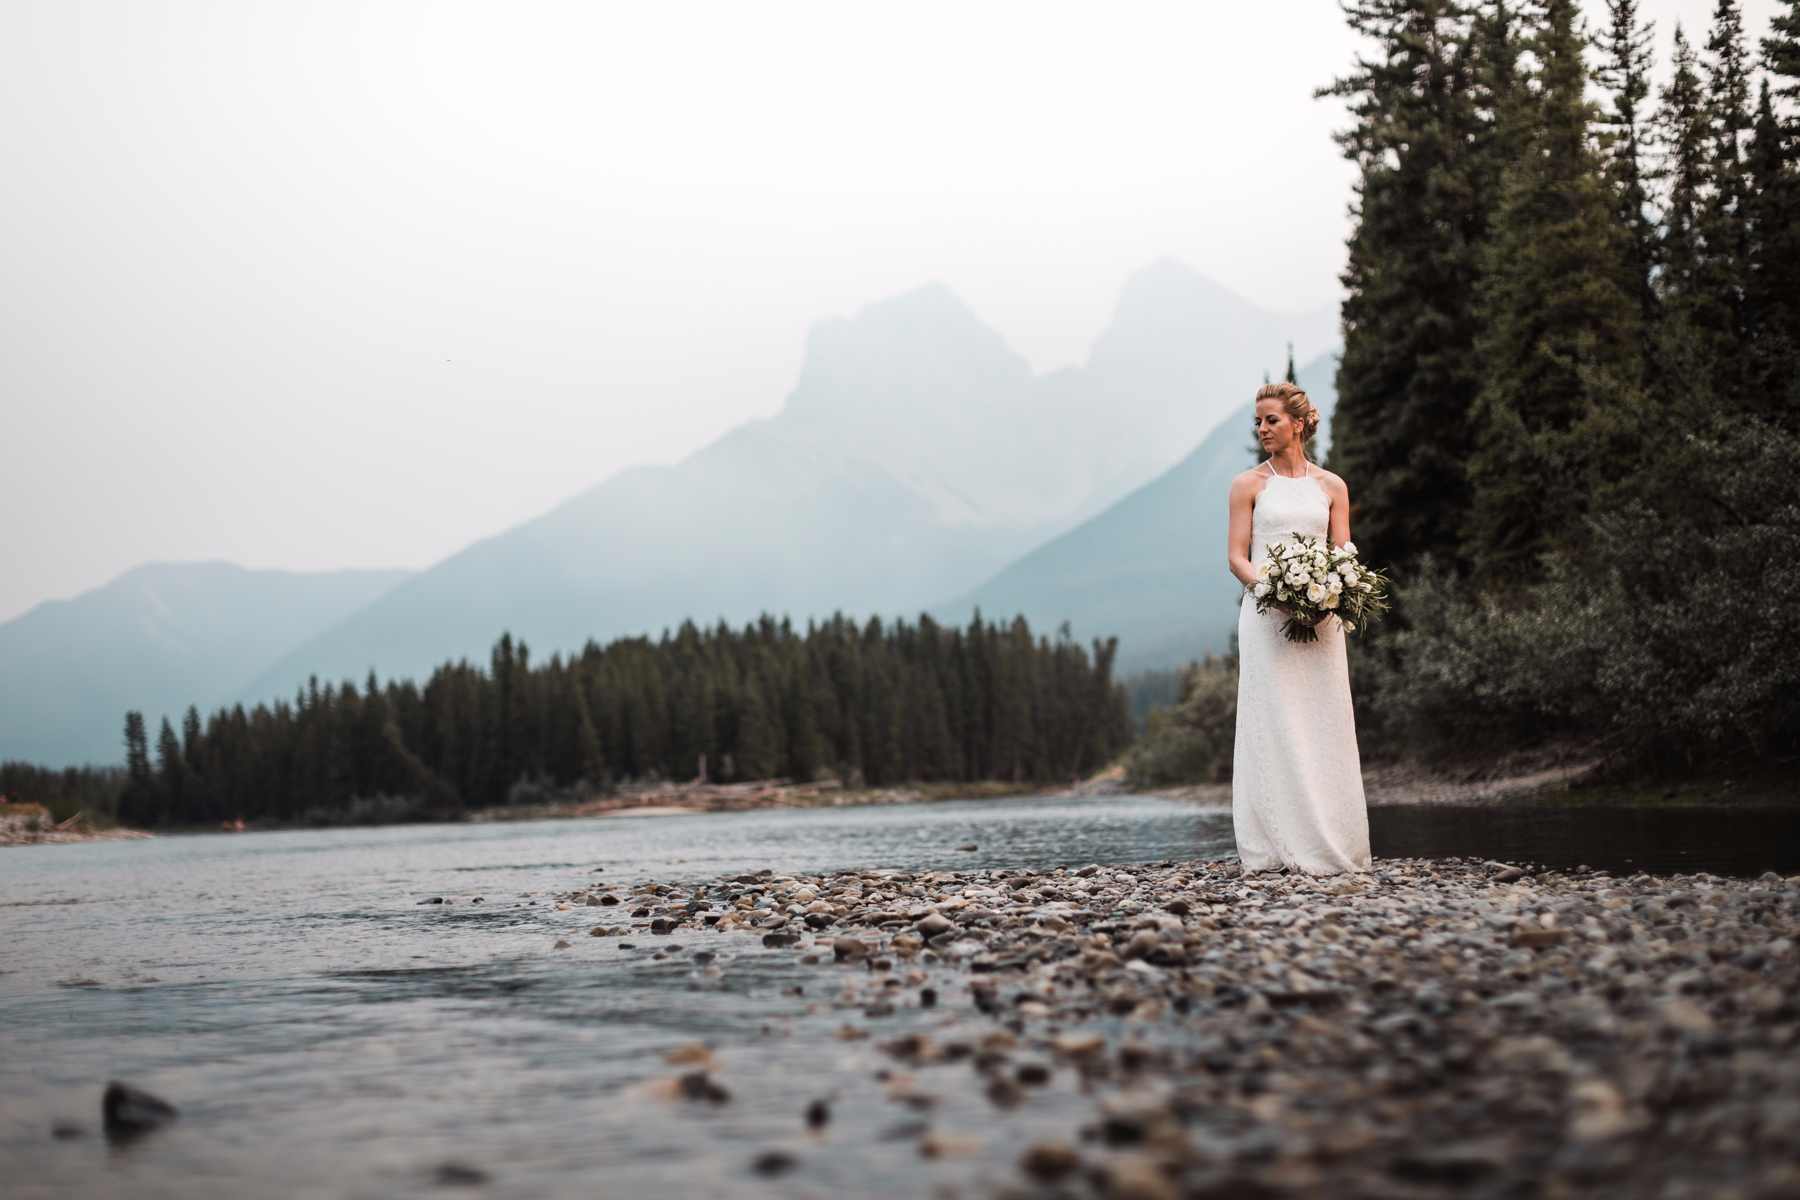 Calgary wedding photographer at Canmore and Banff destination elopement wedding in rocky mountains, Alberta, Canada - Photo 34